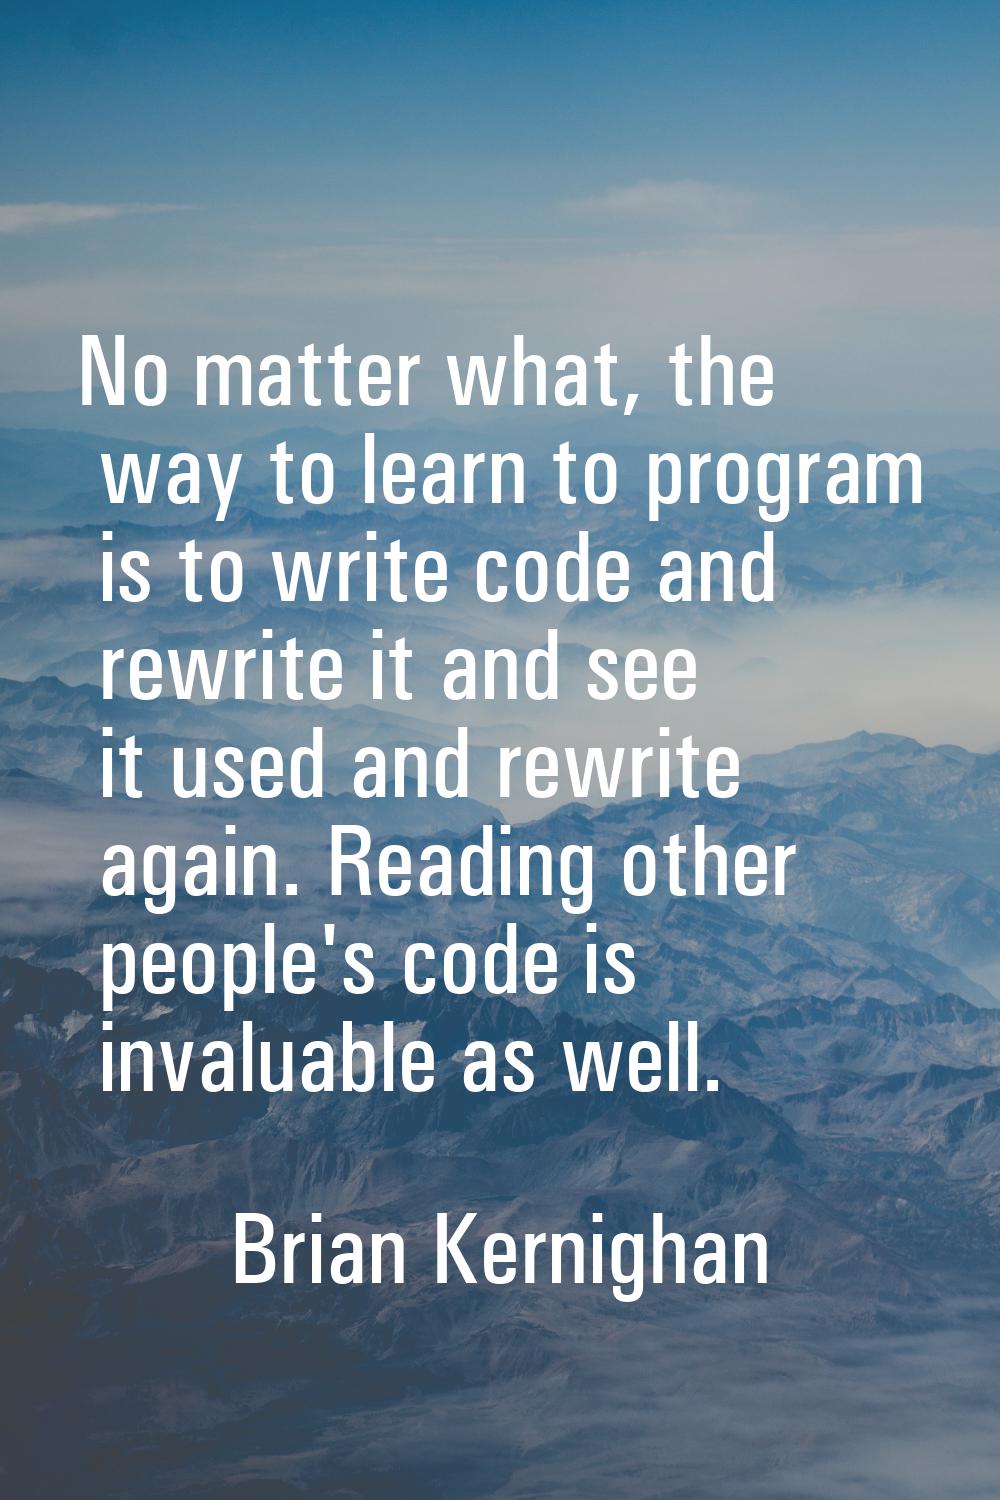 No matter what, the way to learn to program is to write code and rewrite it and see it used and rew